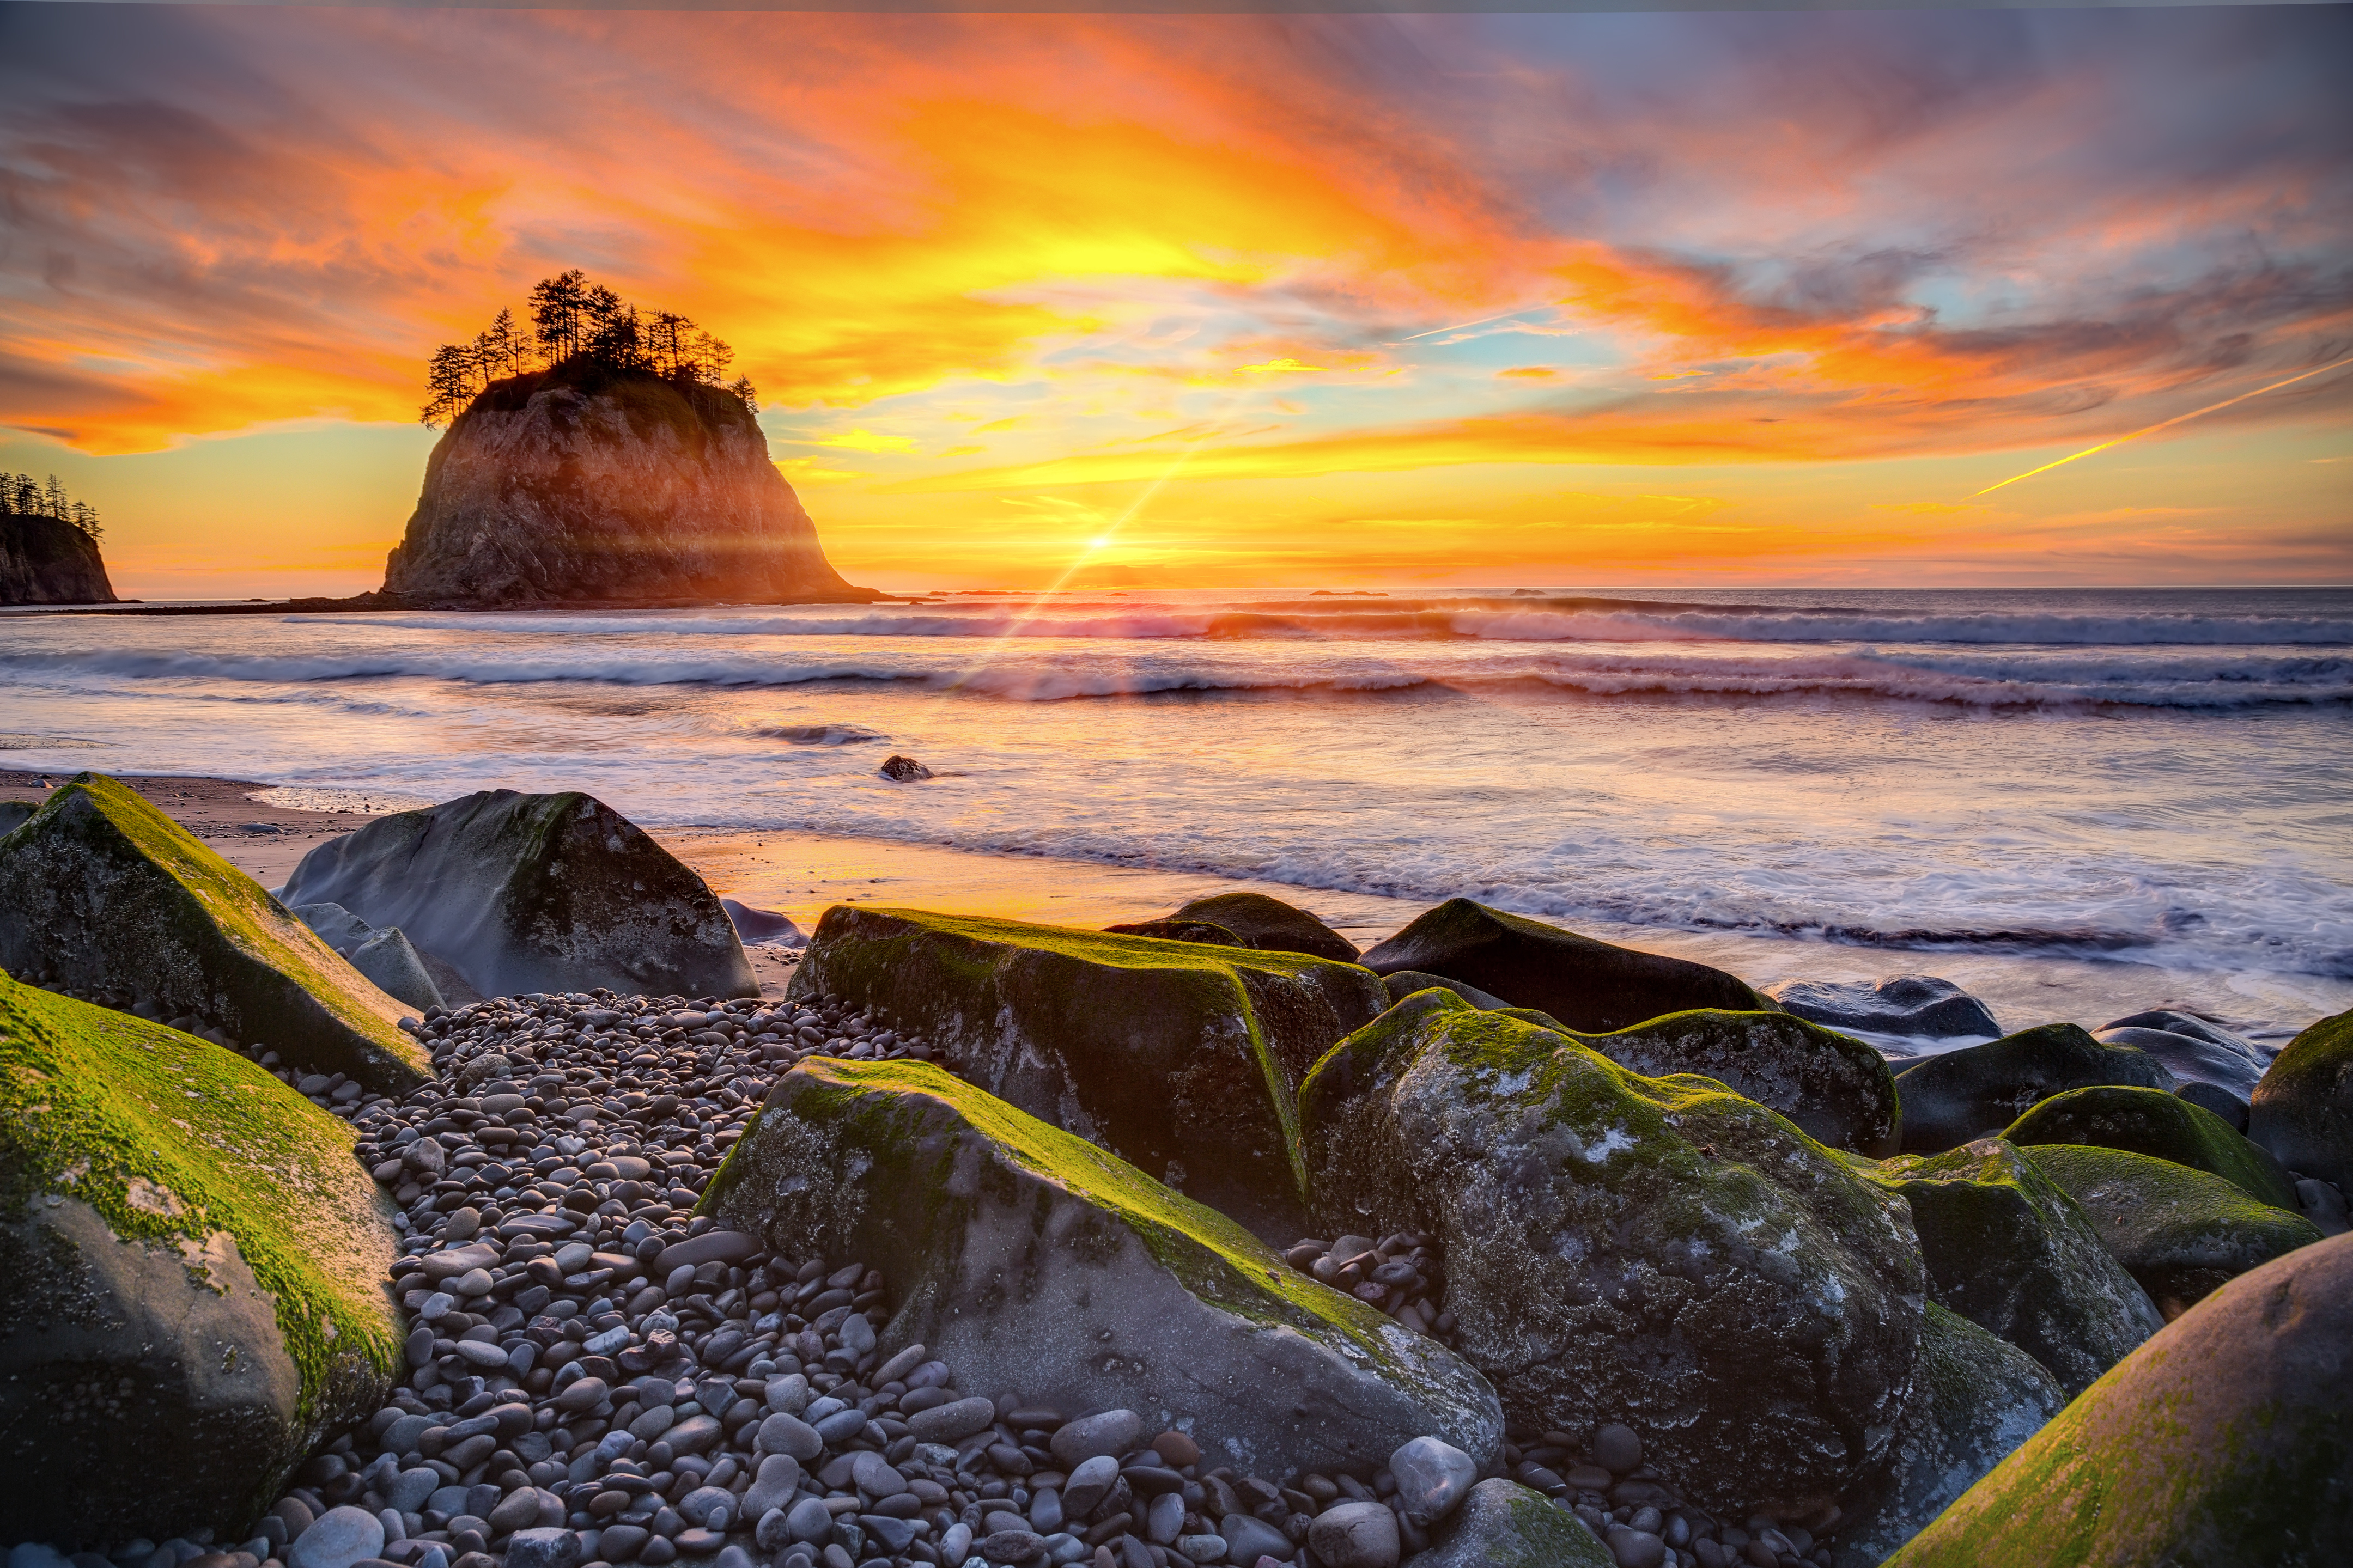 A brightly colored sunset view of a rocky beach with the silhouette of a haystack rock in the distance